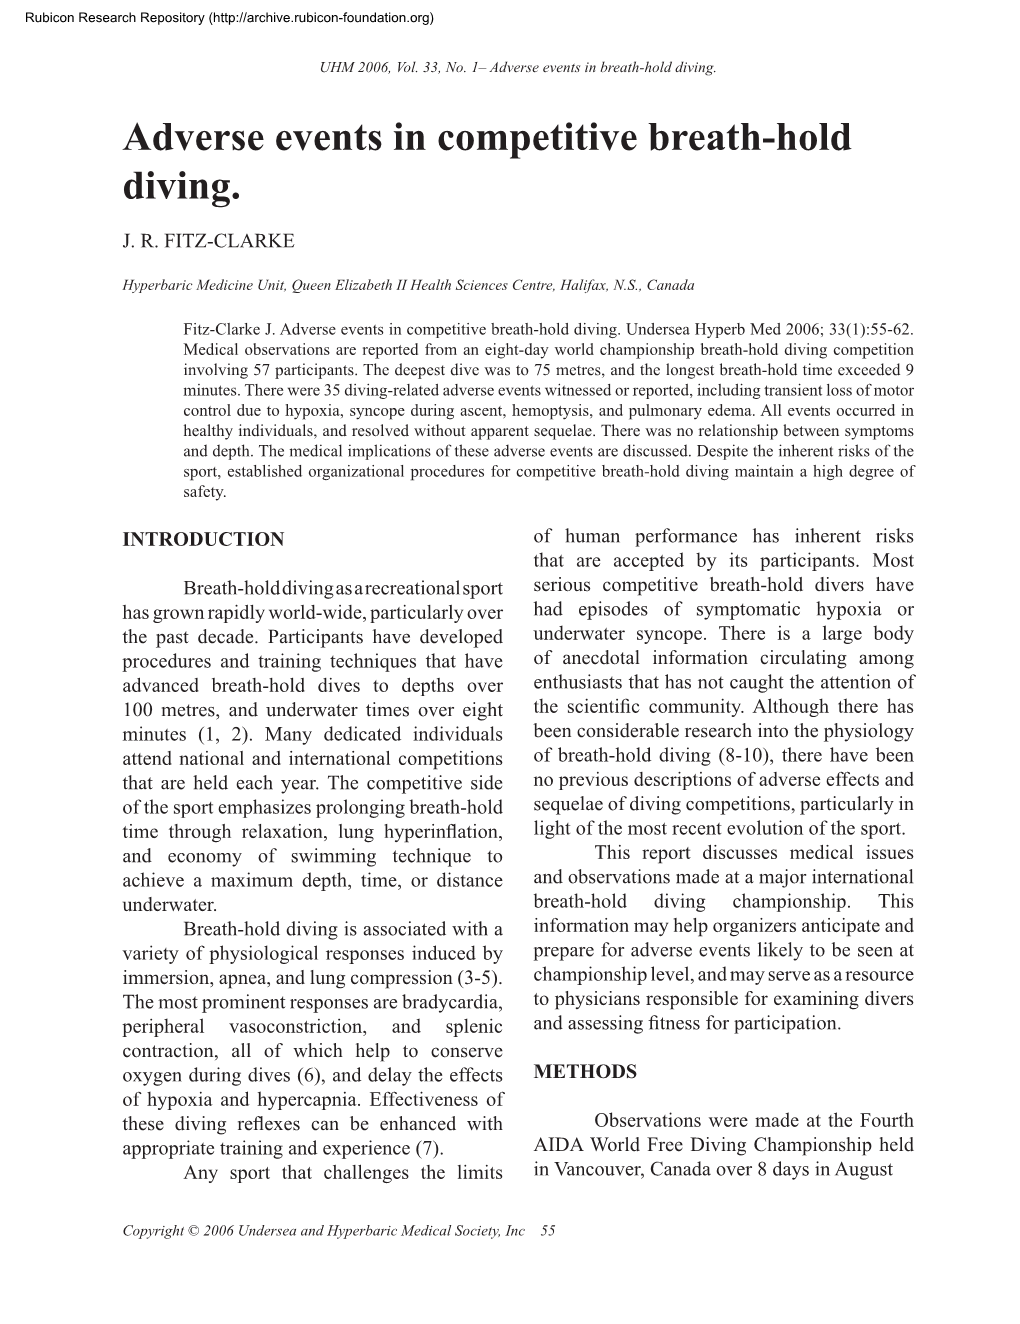 Adverse Events in Competitive Breath-Hold Diving